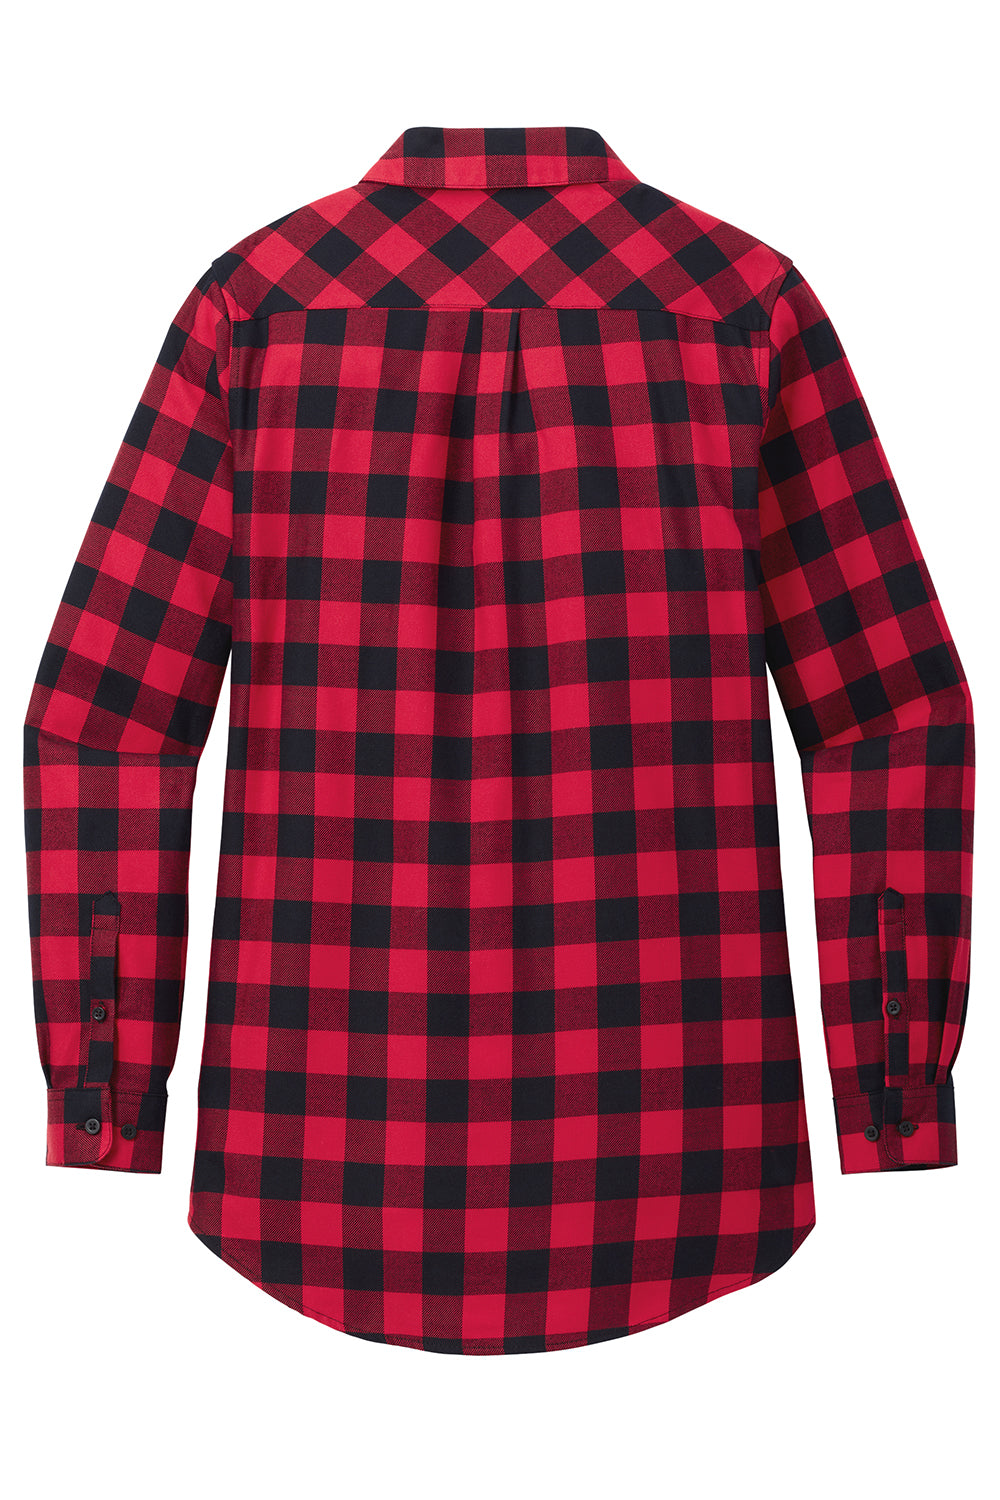 Port Authority LW668 Womens Flannel Long Sleeve Button Down Shirt Red/Black Buffalo Flat Back